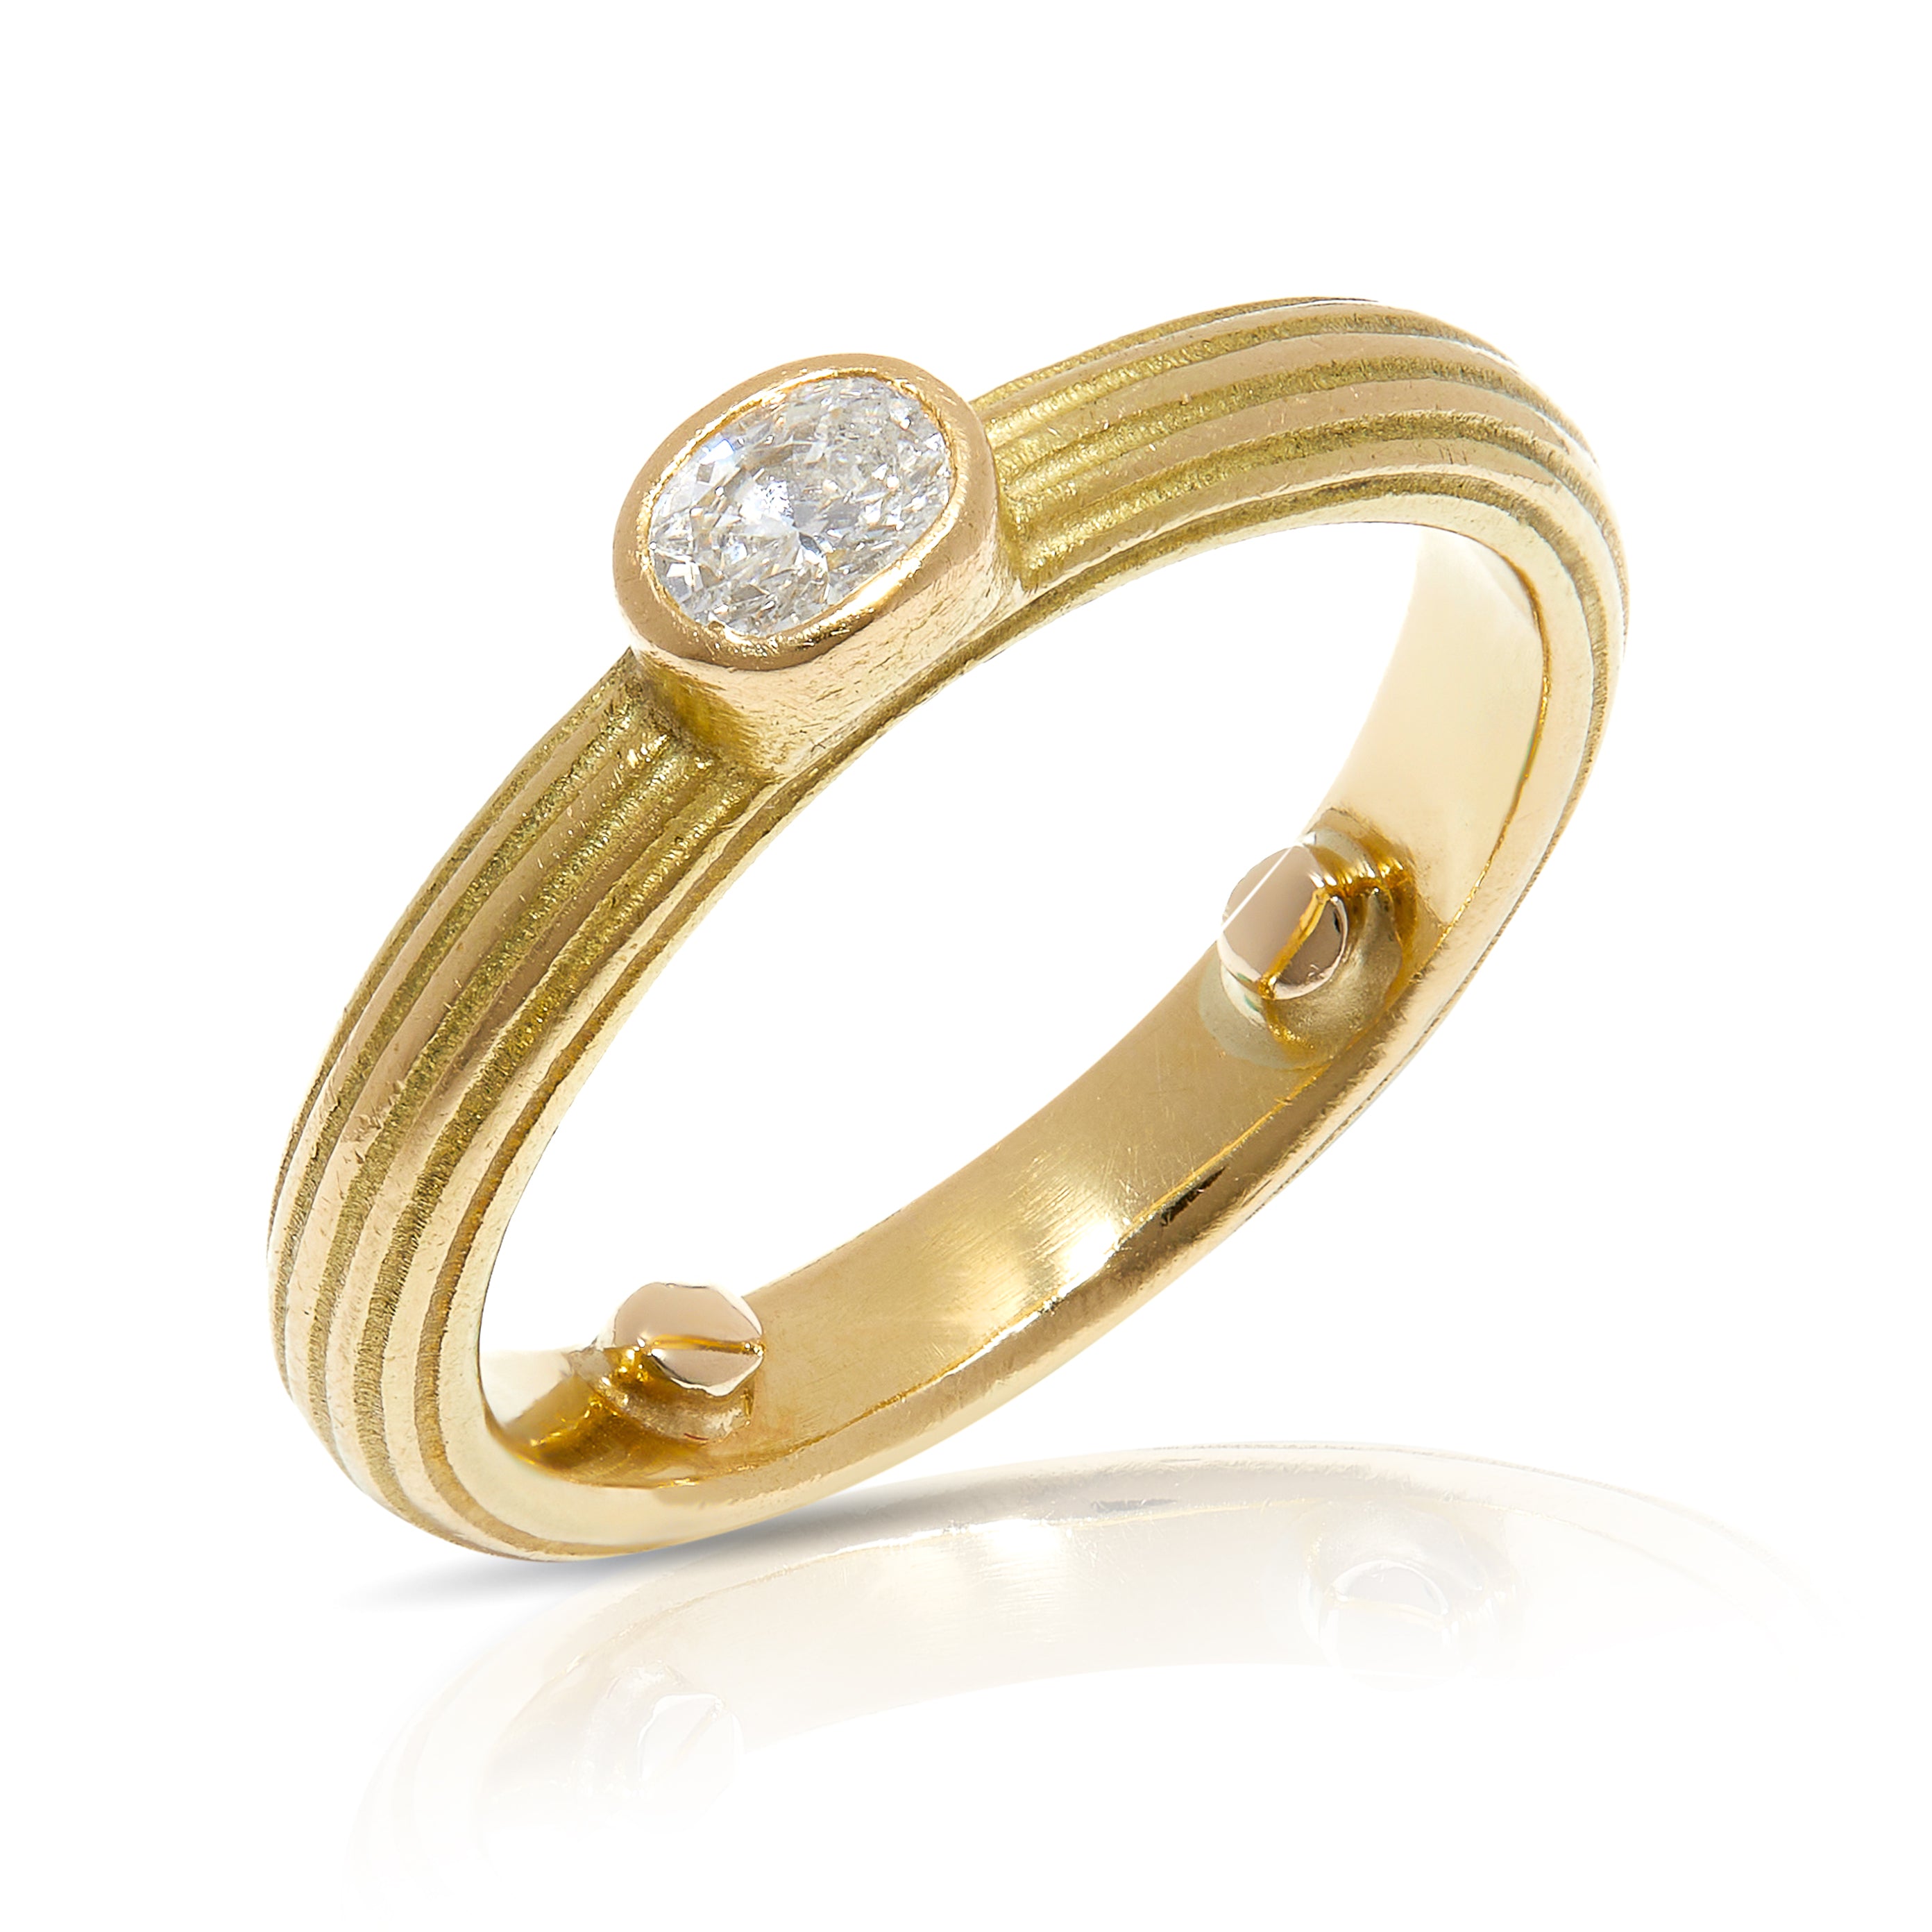 Fluted 18ct gold band ring in a Florentine finish with oval-cut diamond centre.